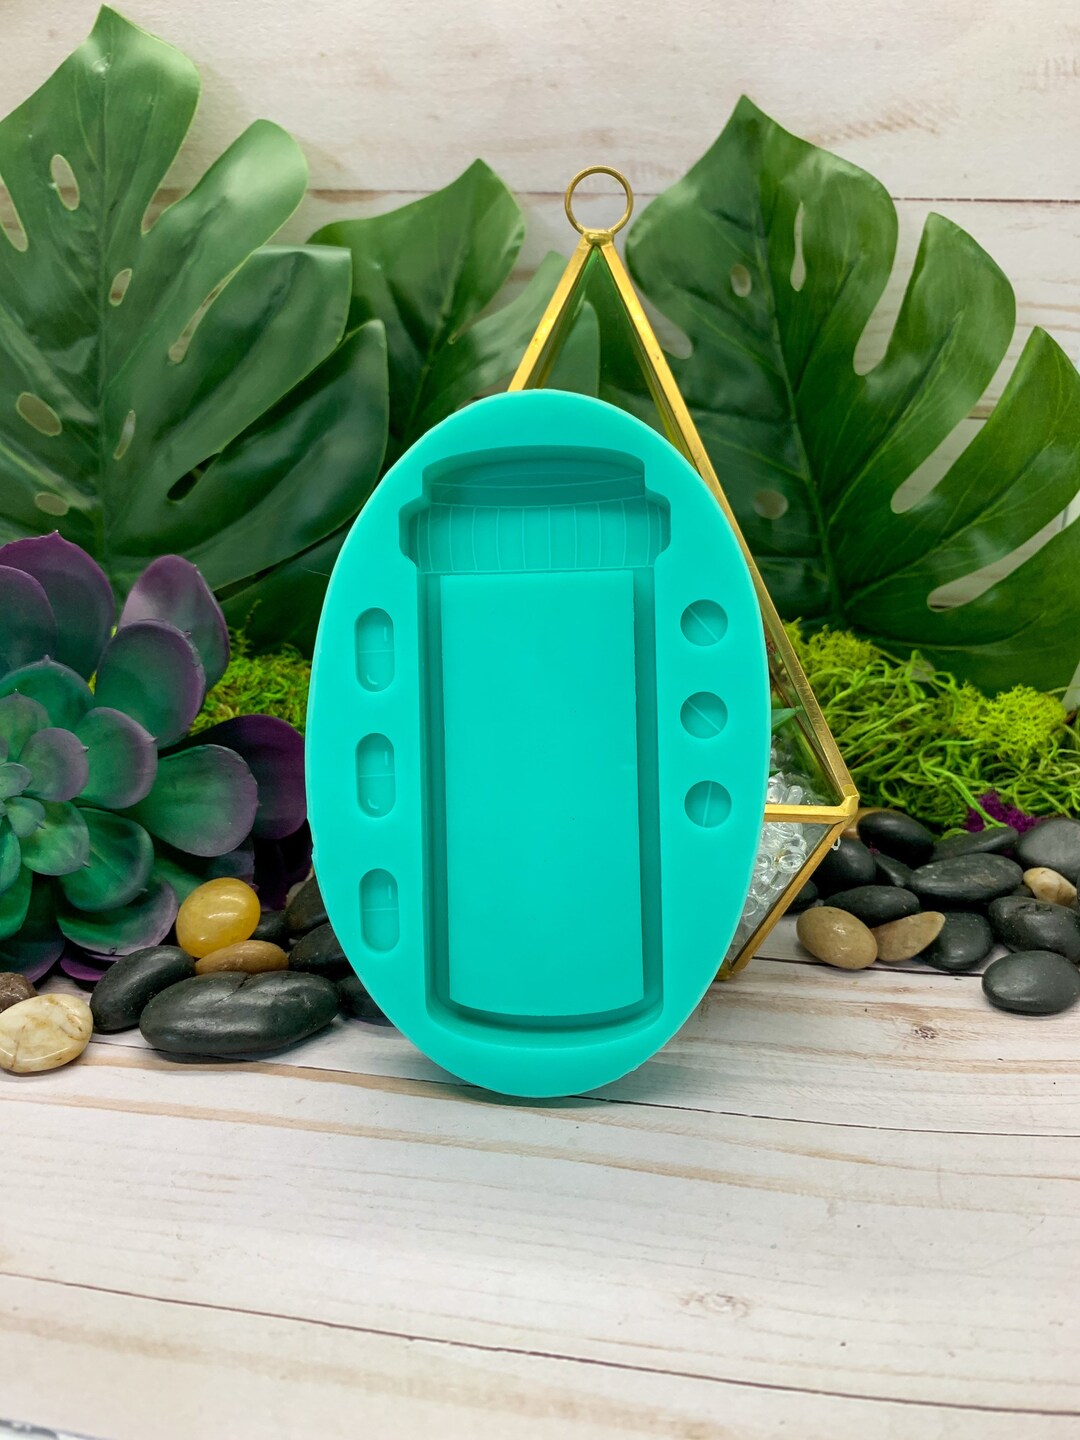 64mm Baby Bottle Shaker Silicone Mold Resin Casting Mold for 